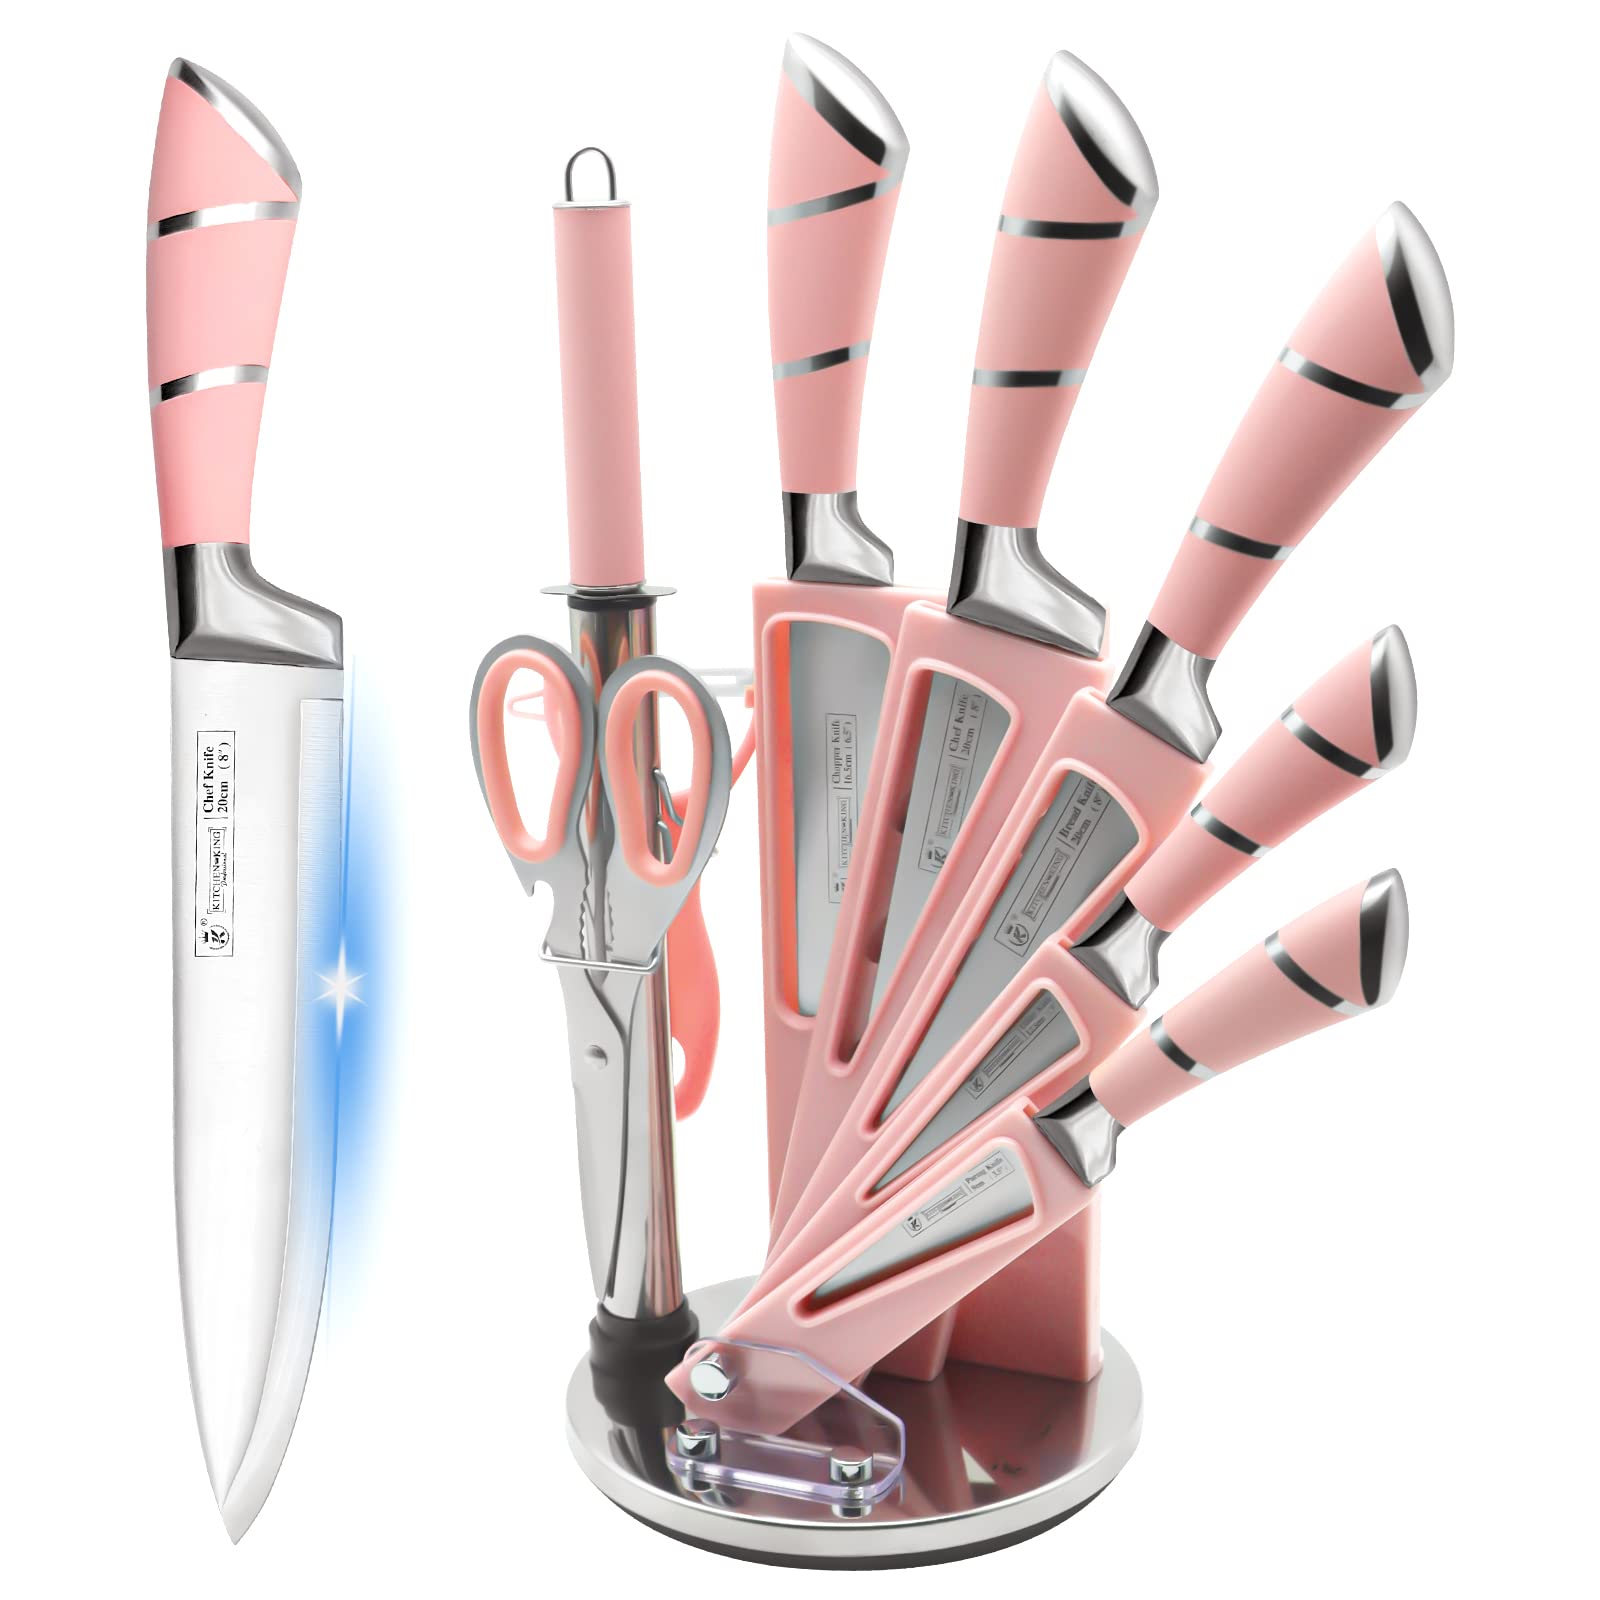 Kitchen Knife Set, 9-Pieces Pink Professional Sharp Chef Knife Set with Acrylic Stand, Striped Hollow Handle Knife Block Set with Gift Box for Family Lover Friends